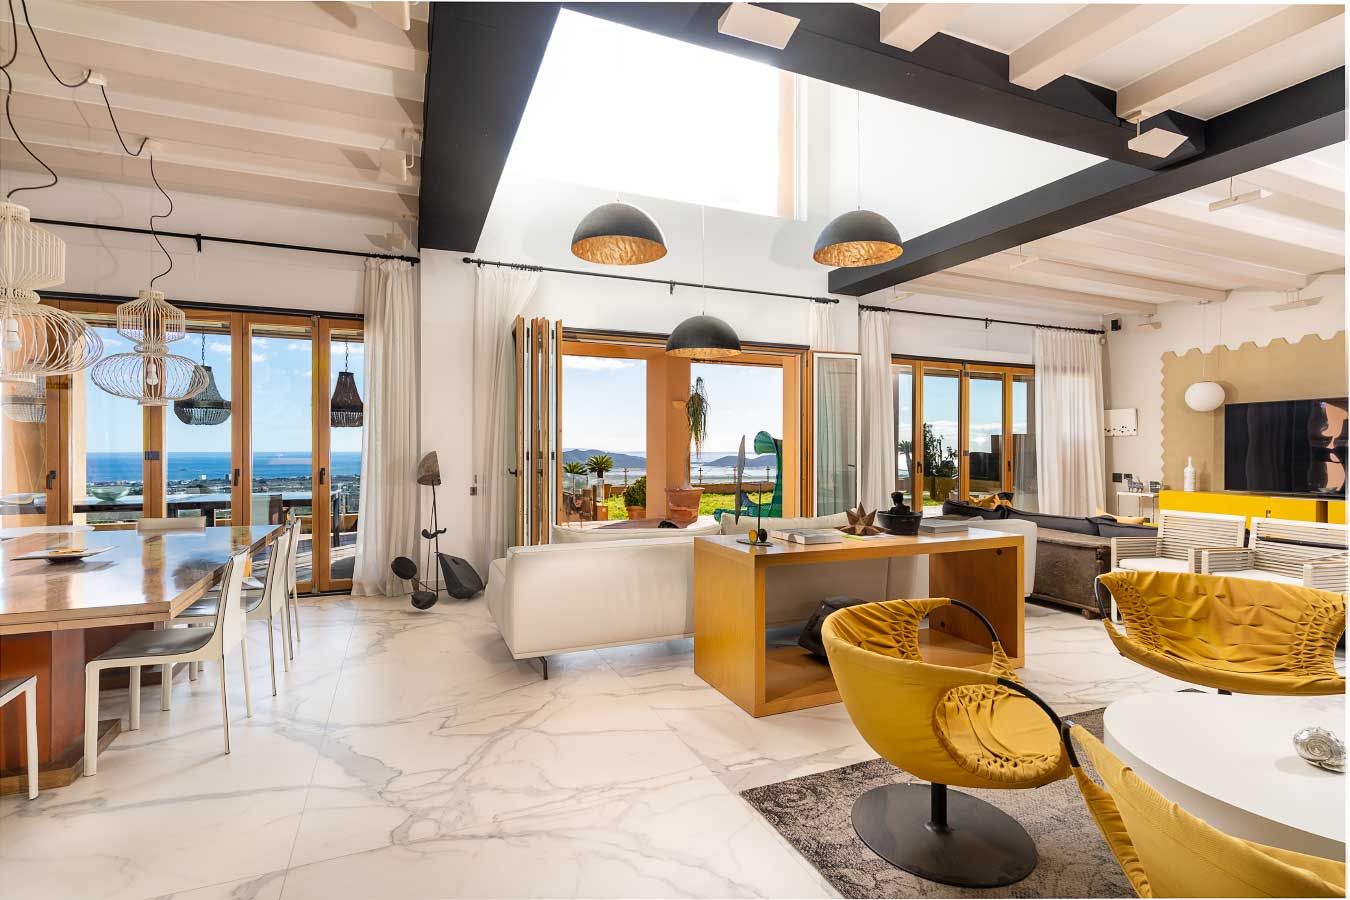 Spacious and airy living room with high ceilings and expansive windows offering southern sea views in a luxury Ibiza villa